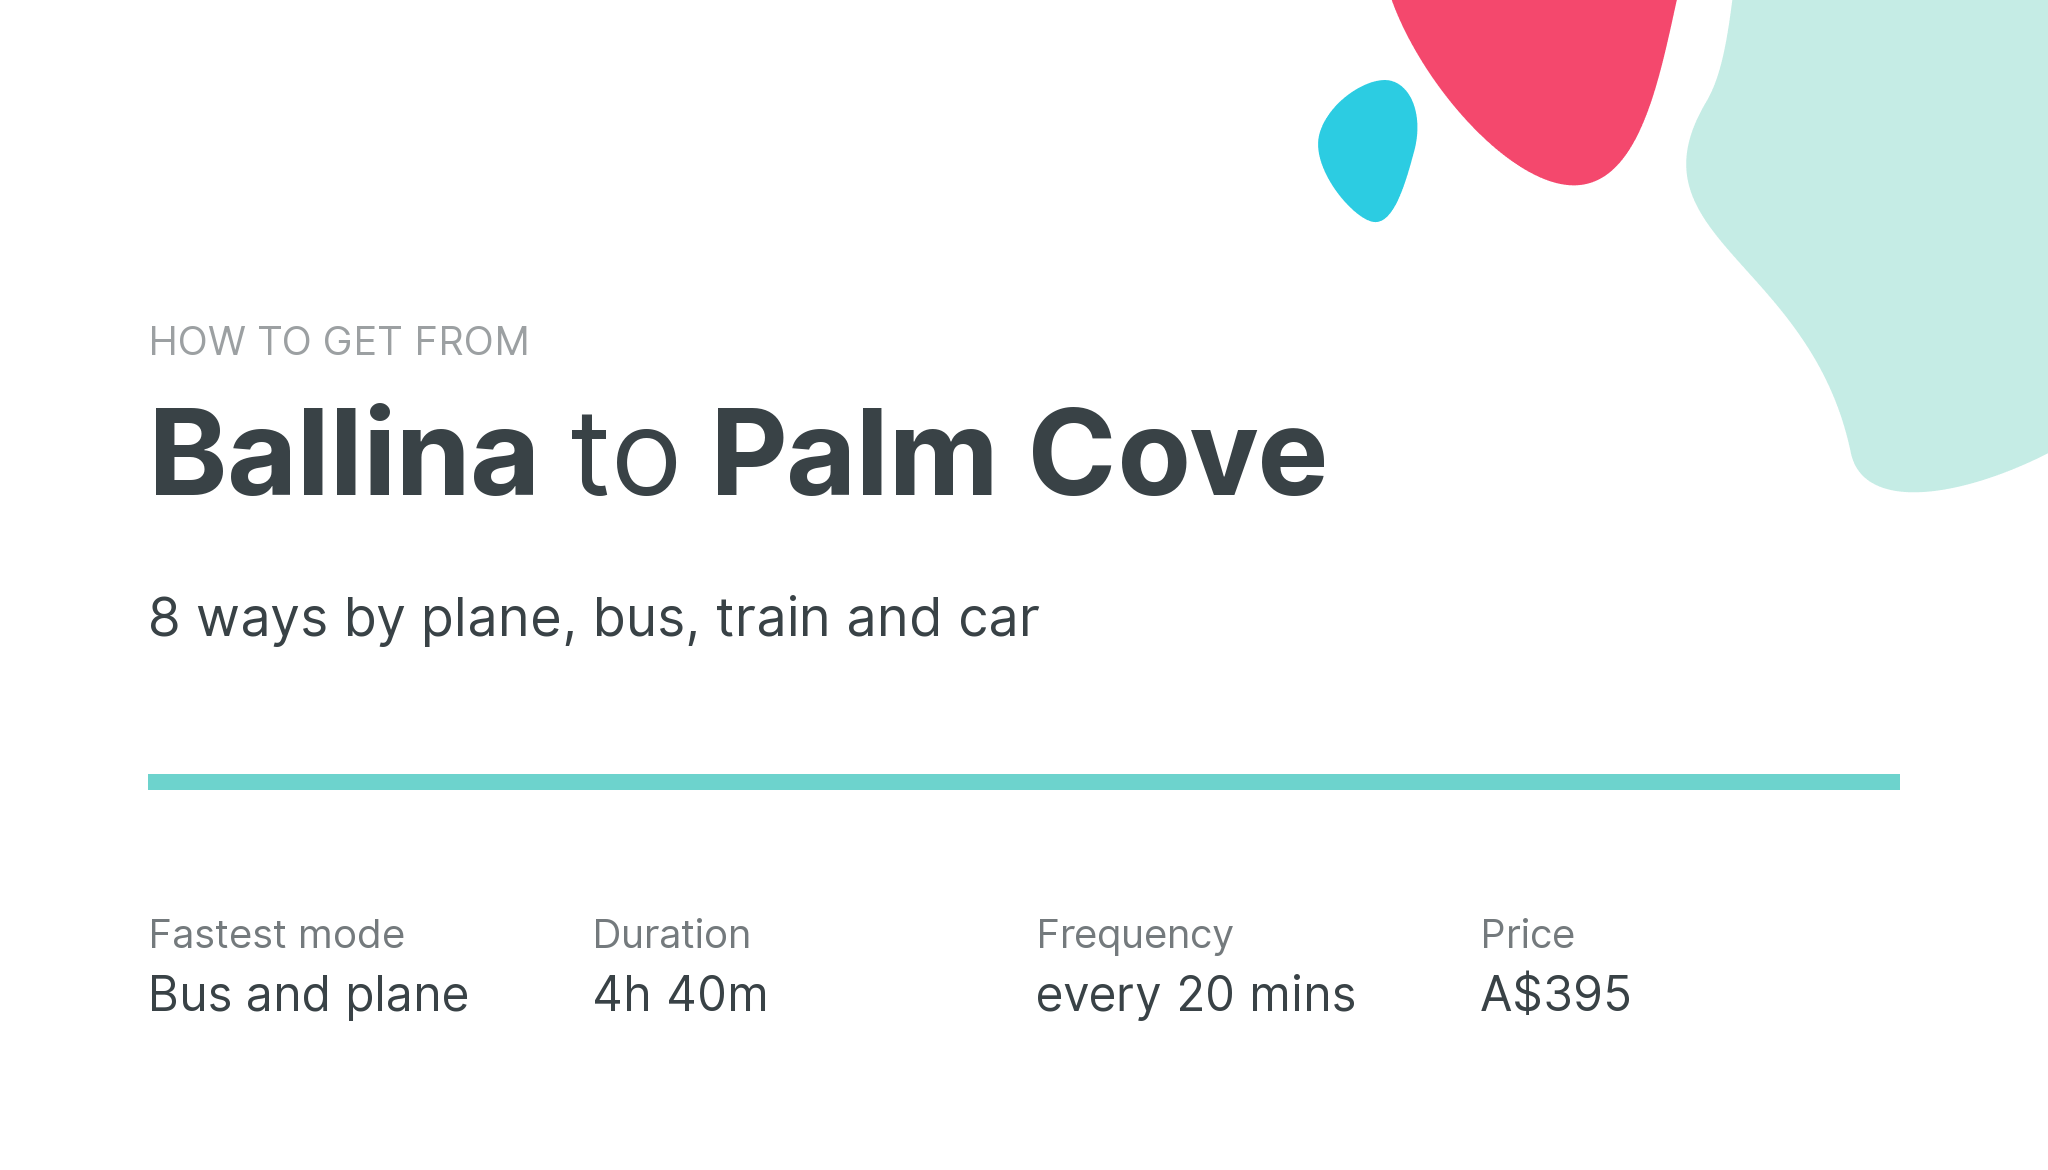 How do I get from Ballina to Palm Cove